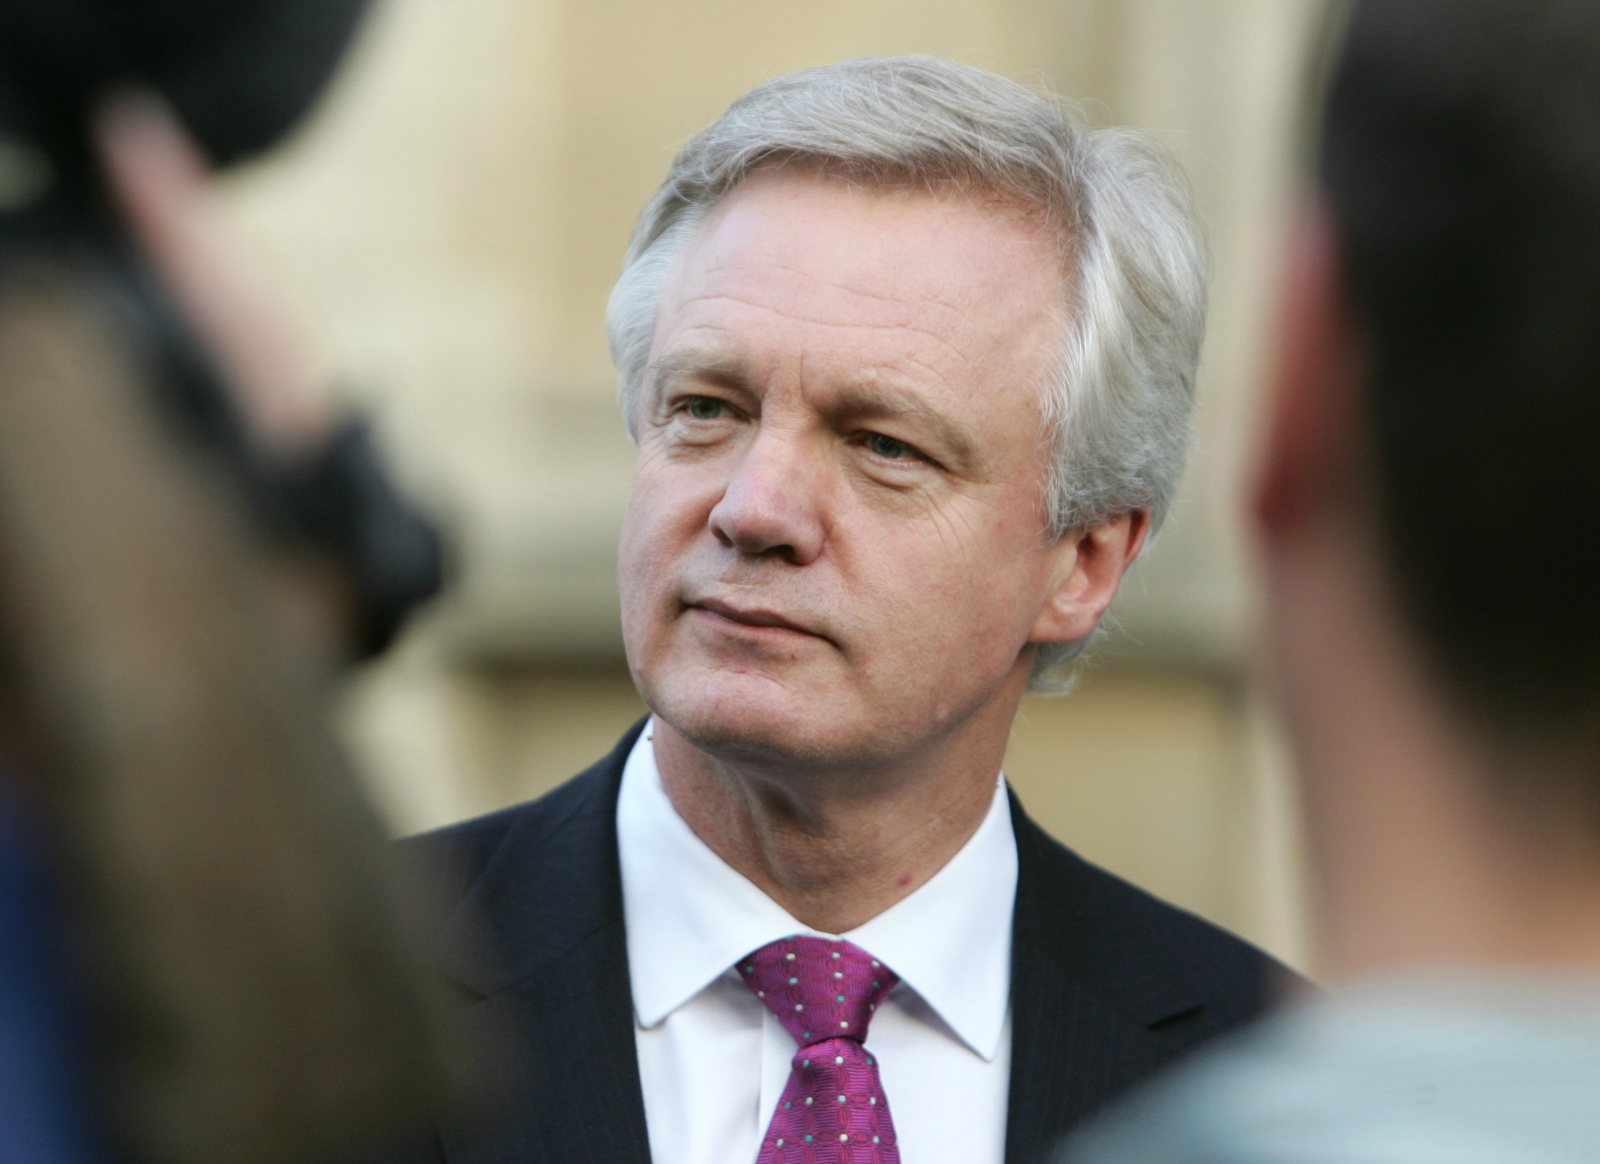 Conservative MP David Davis, who is now the Brexit Minister